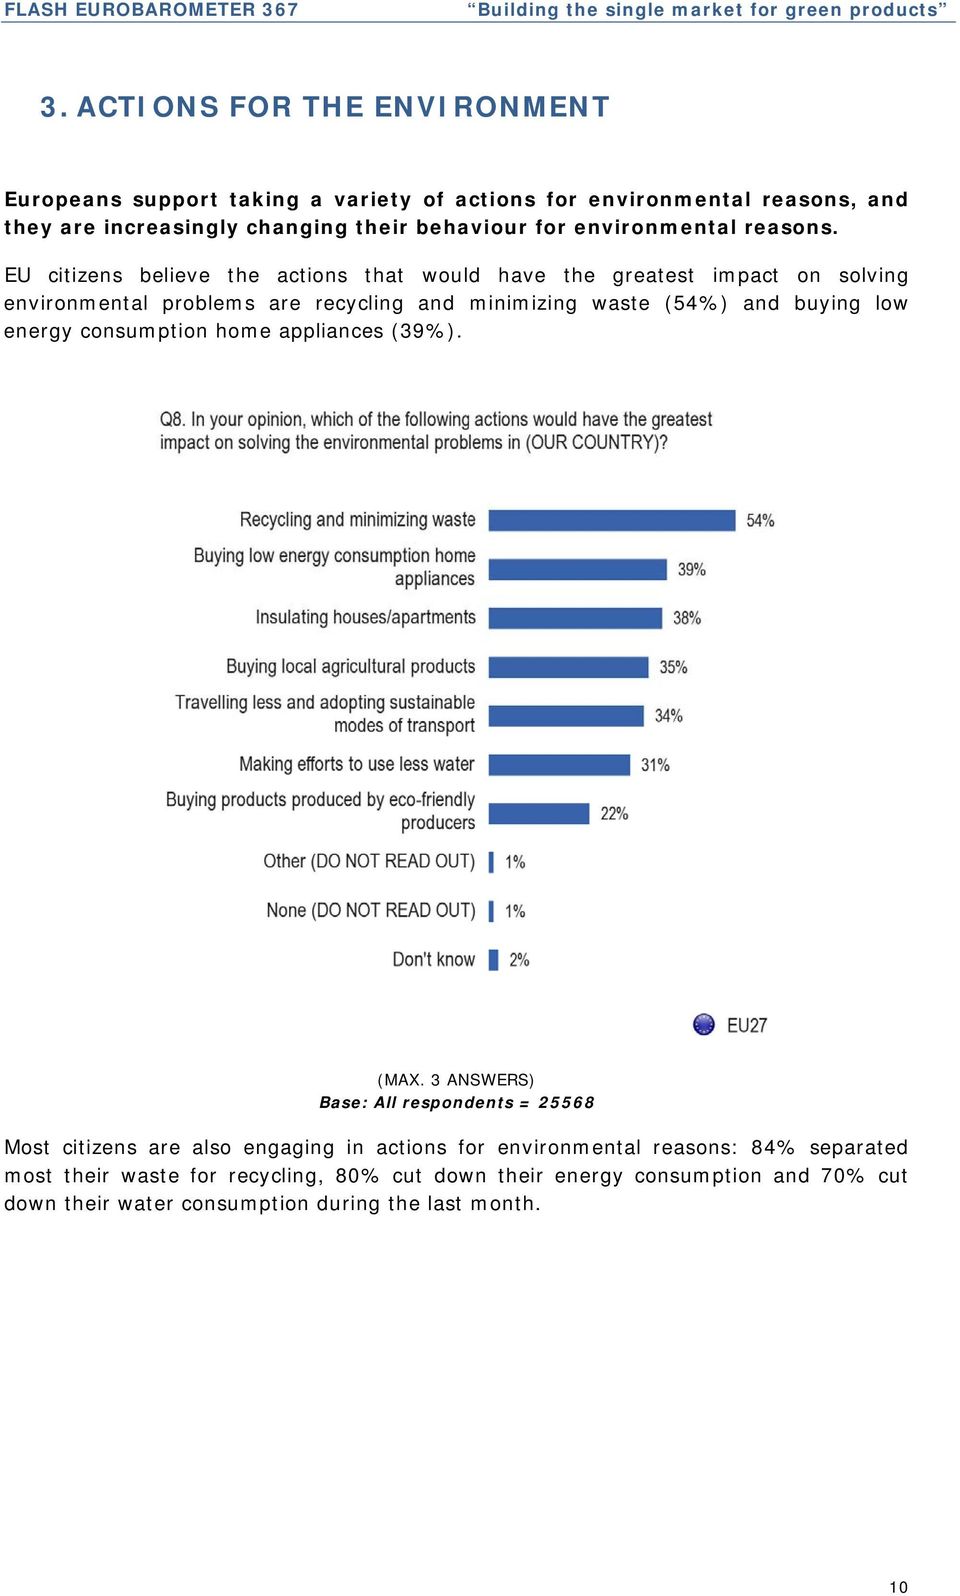 EU citizens believe the actions that would have the greatest impact on solving environmental problems are recycling and minimizing waste (54%) and buying low